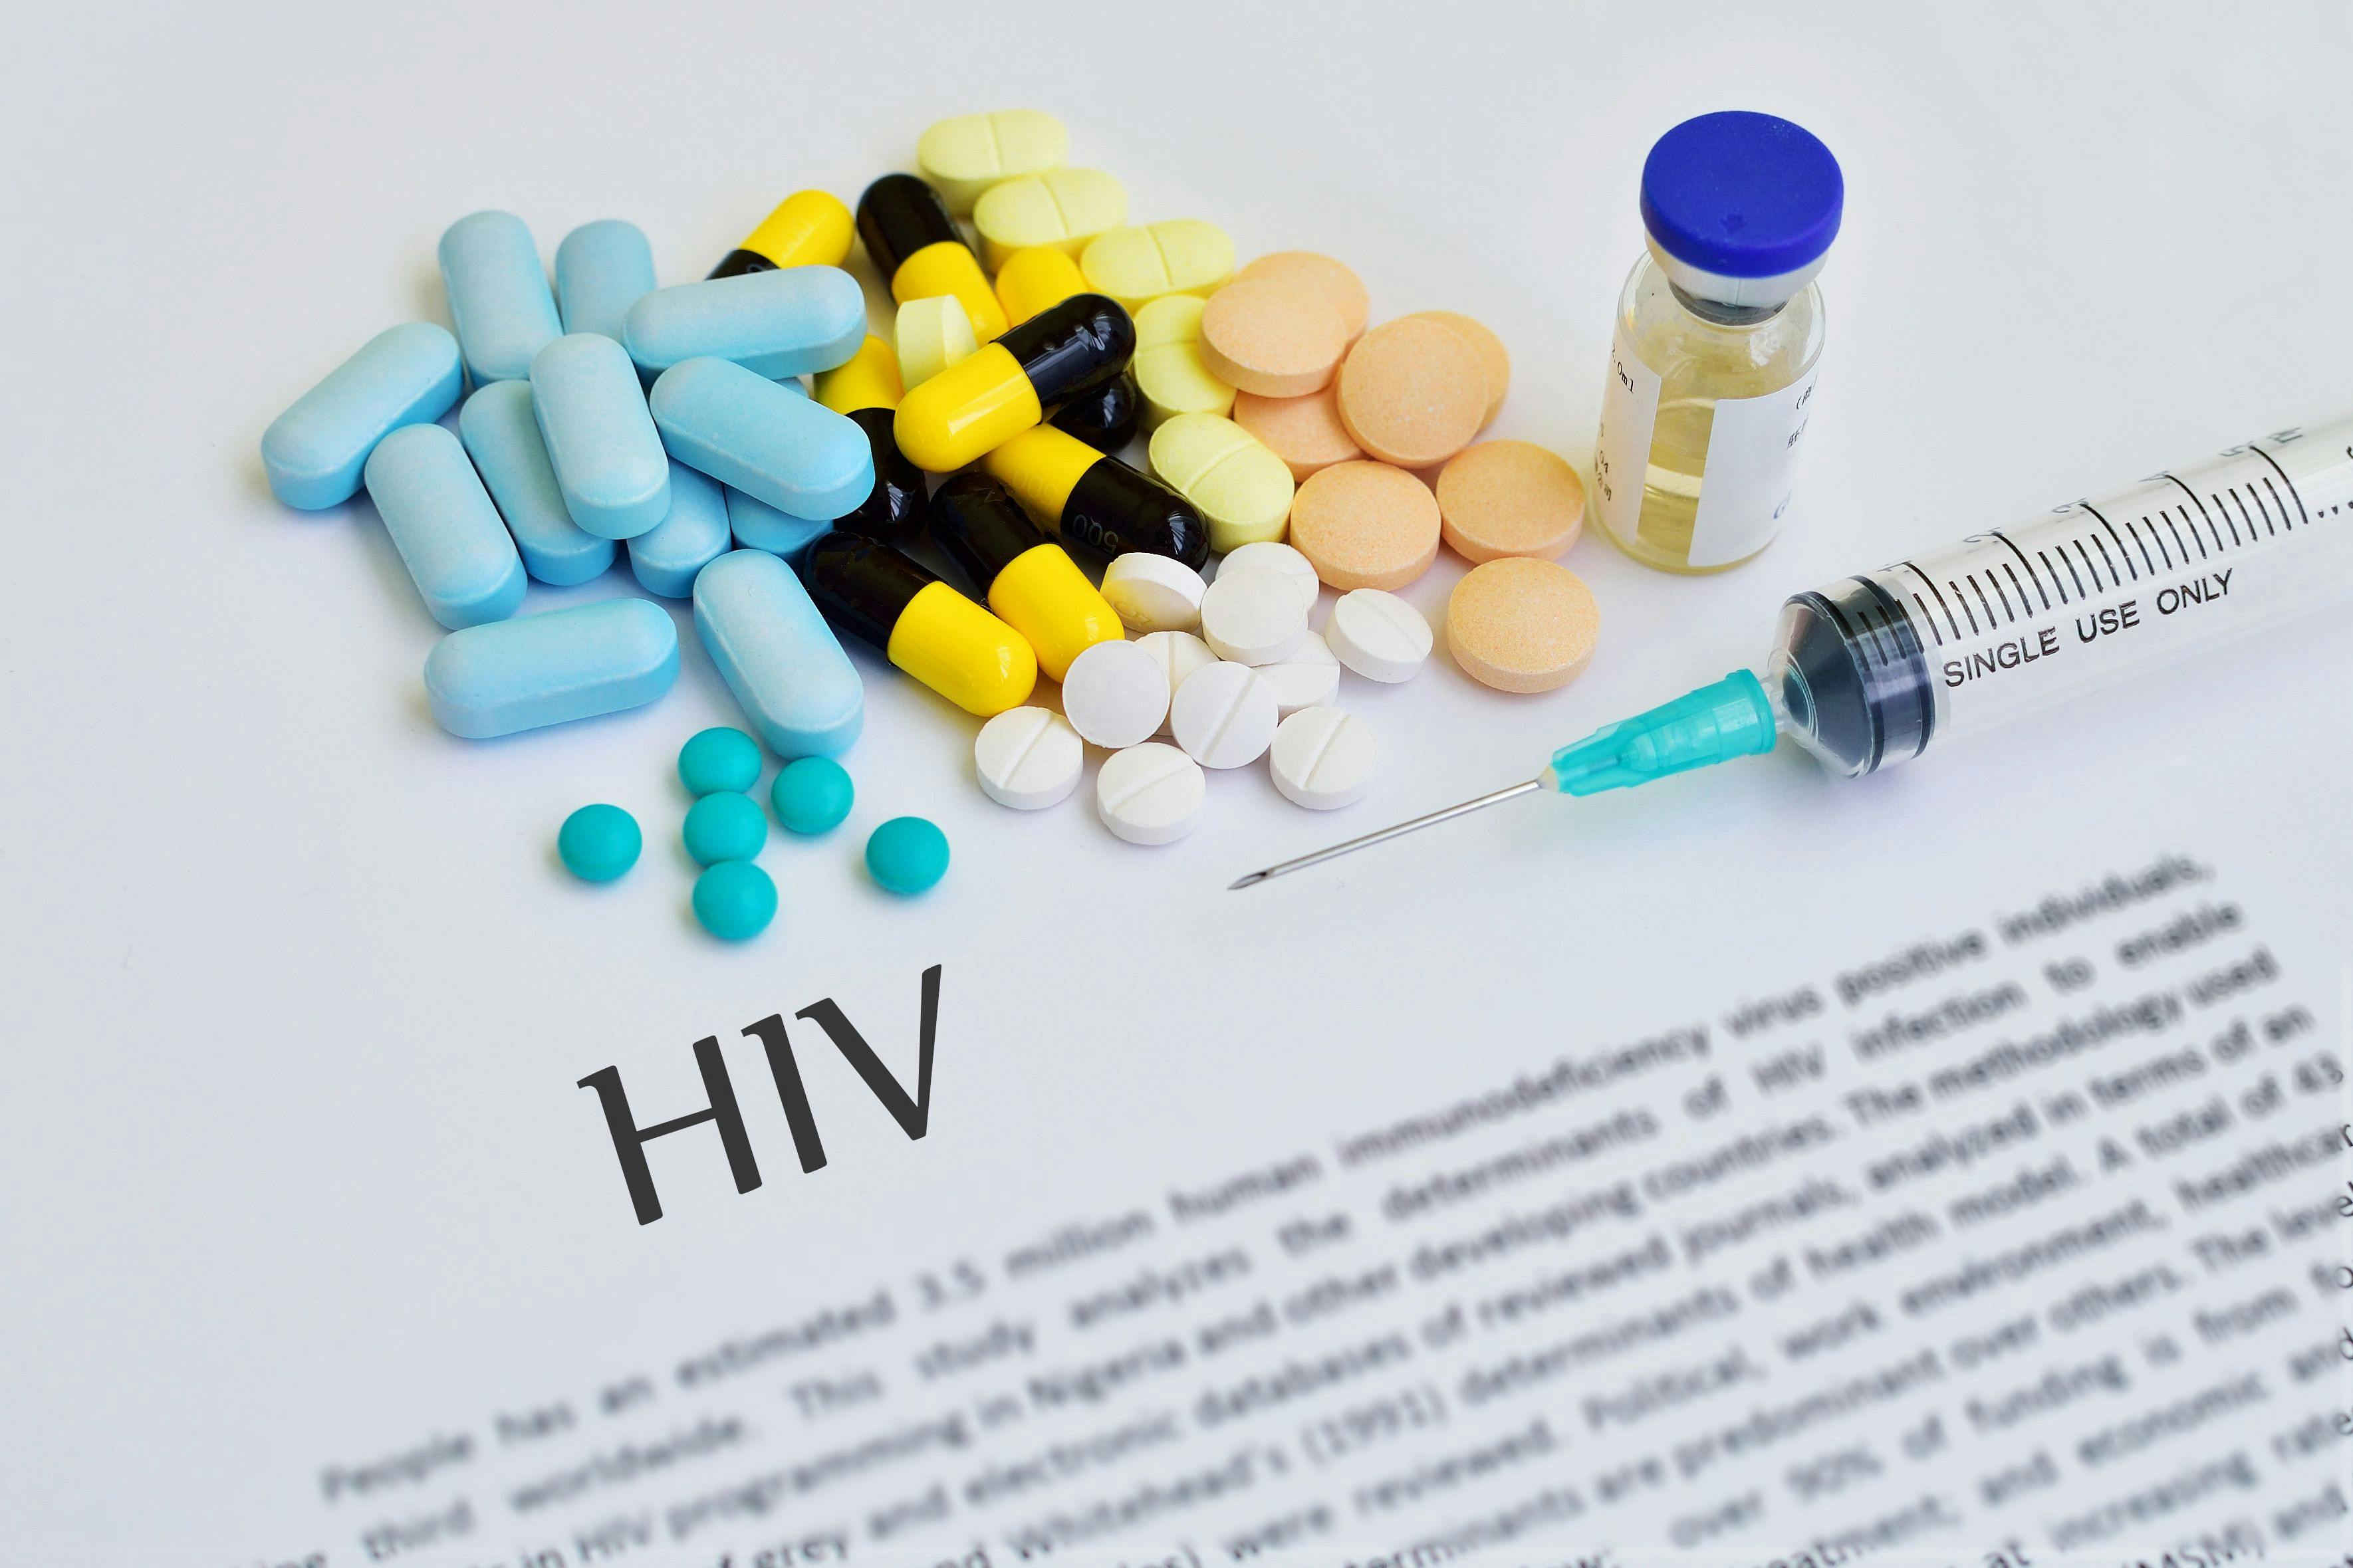 The Art of ART: The Pharmacist’s Role in HIV Care